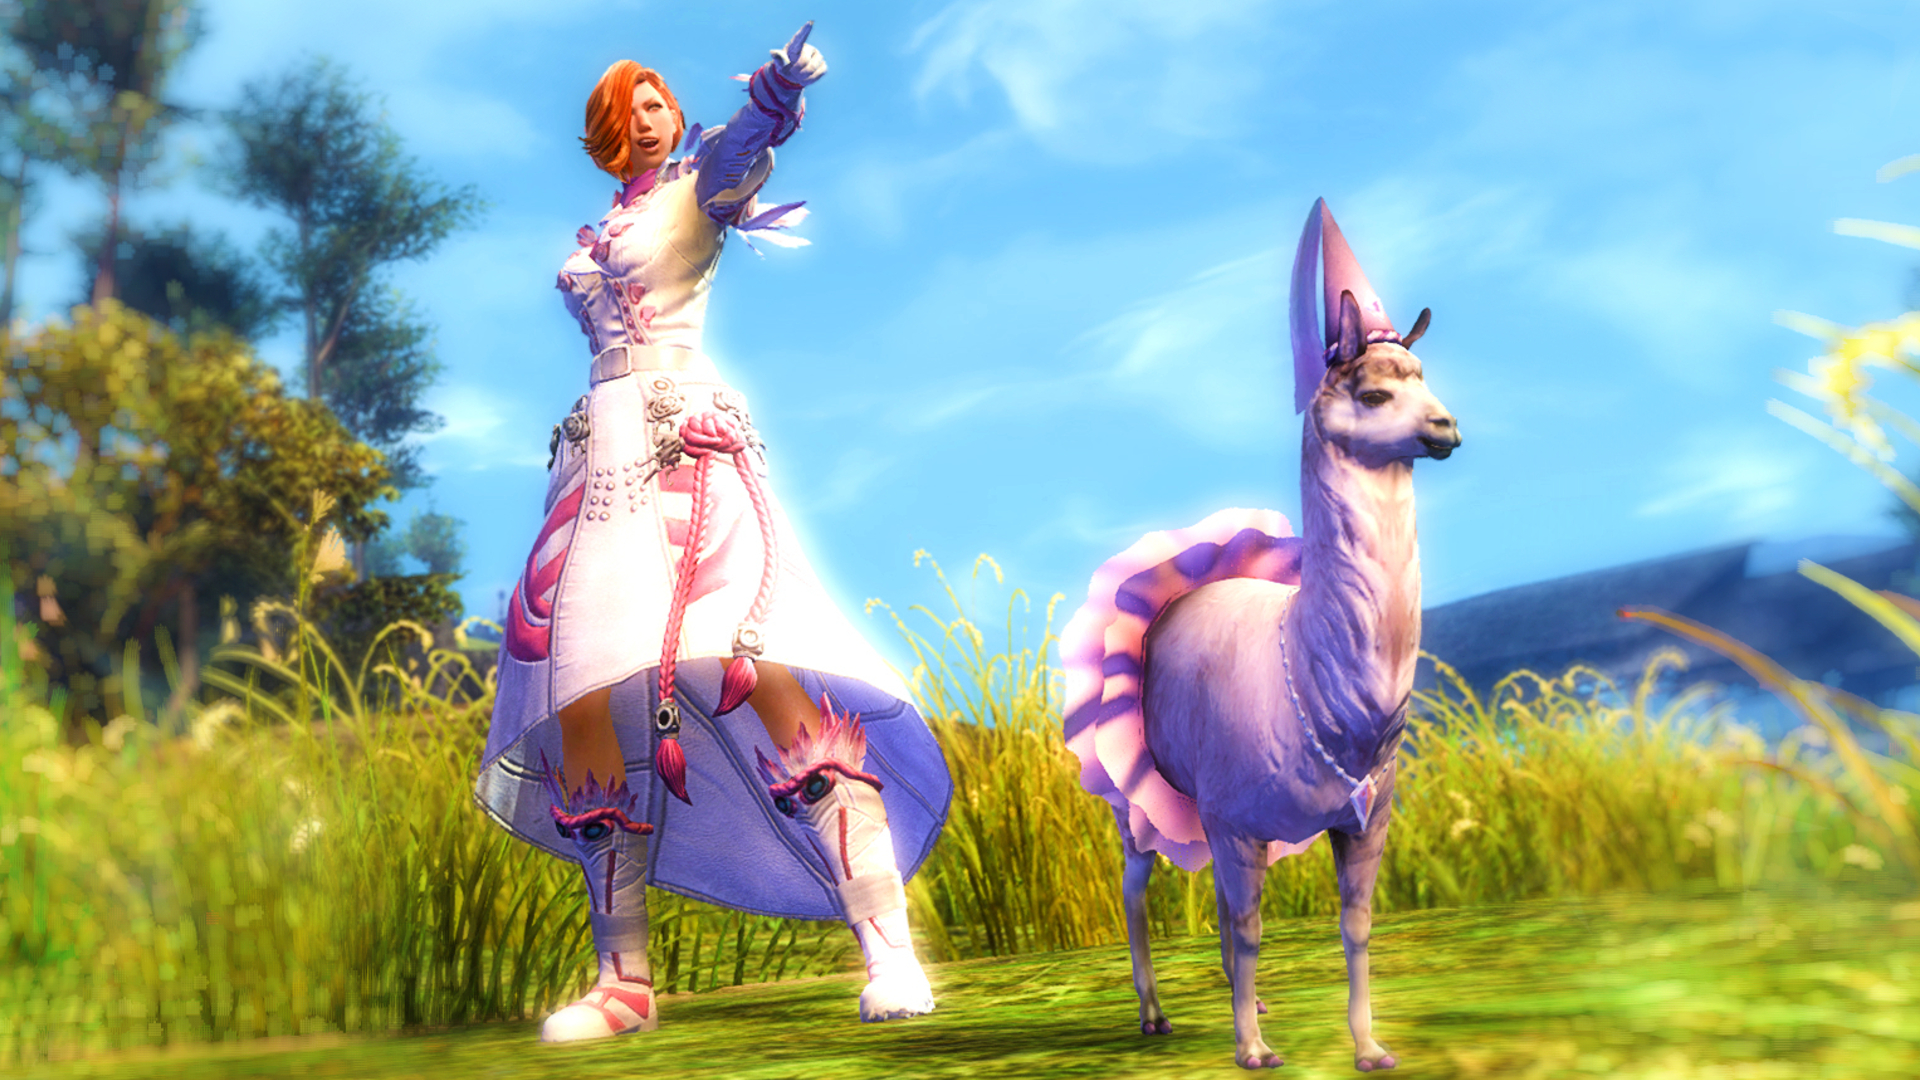 Guild Wars 2 celebrates Pride with colorful free wings